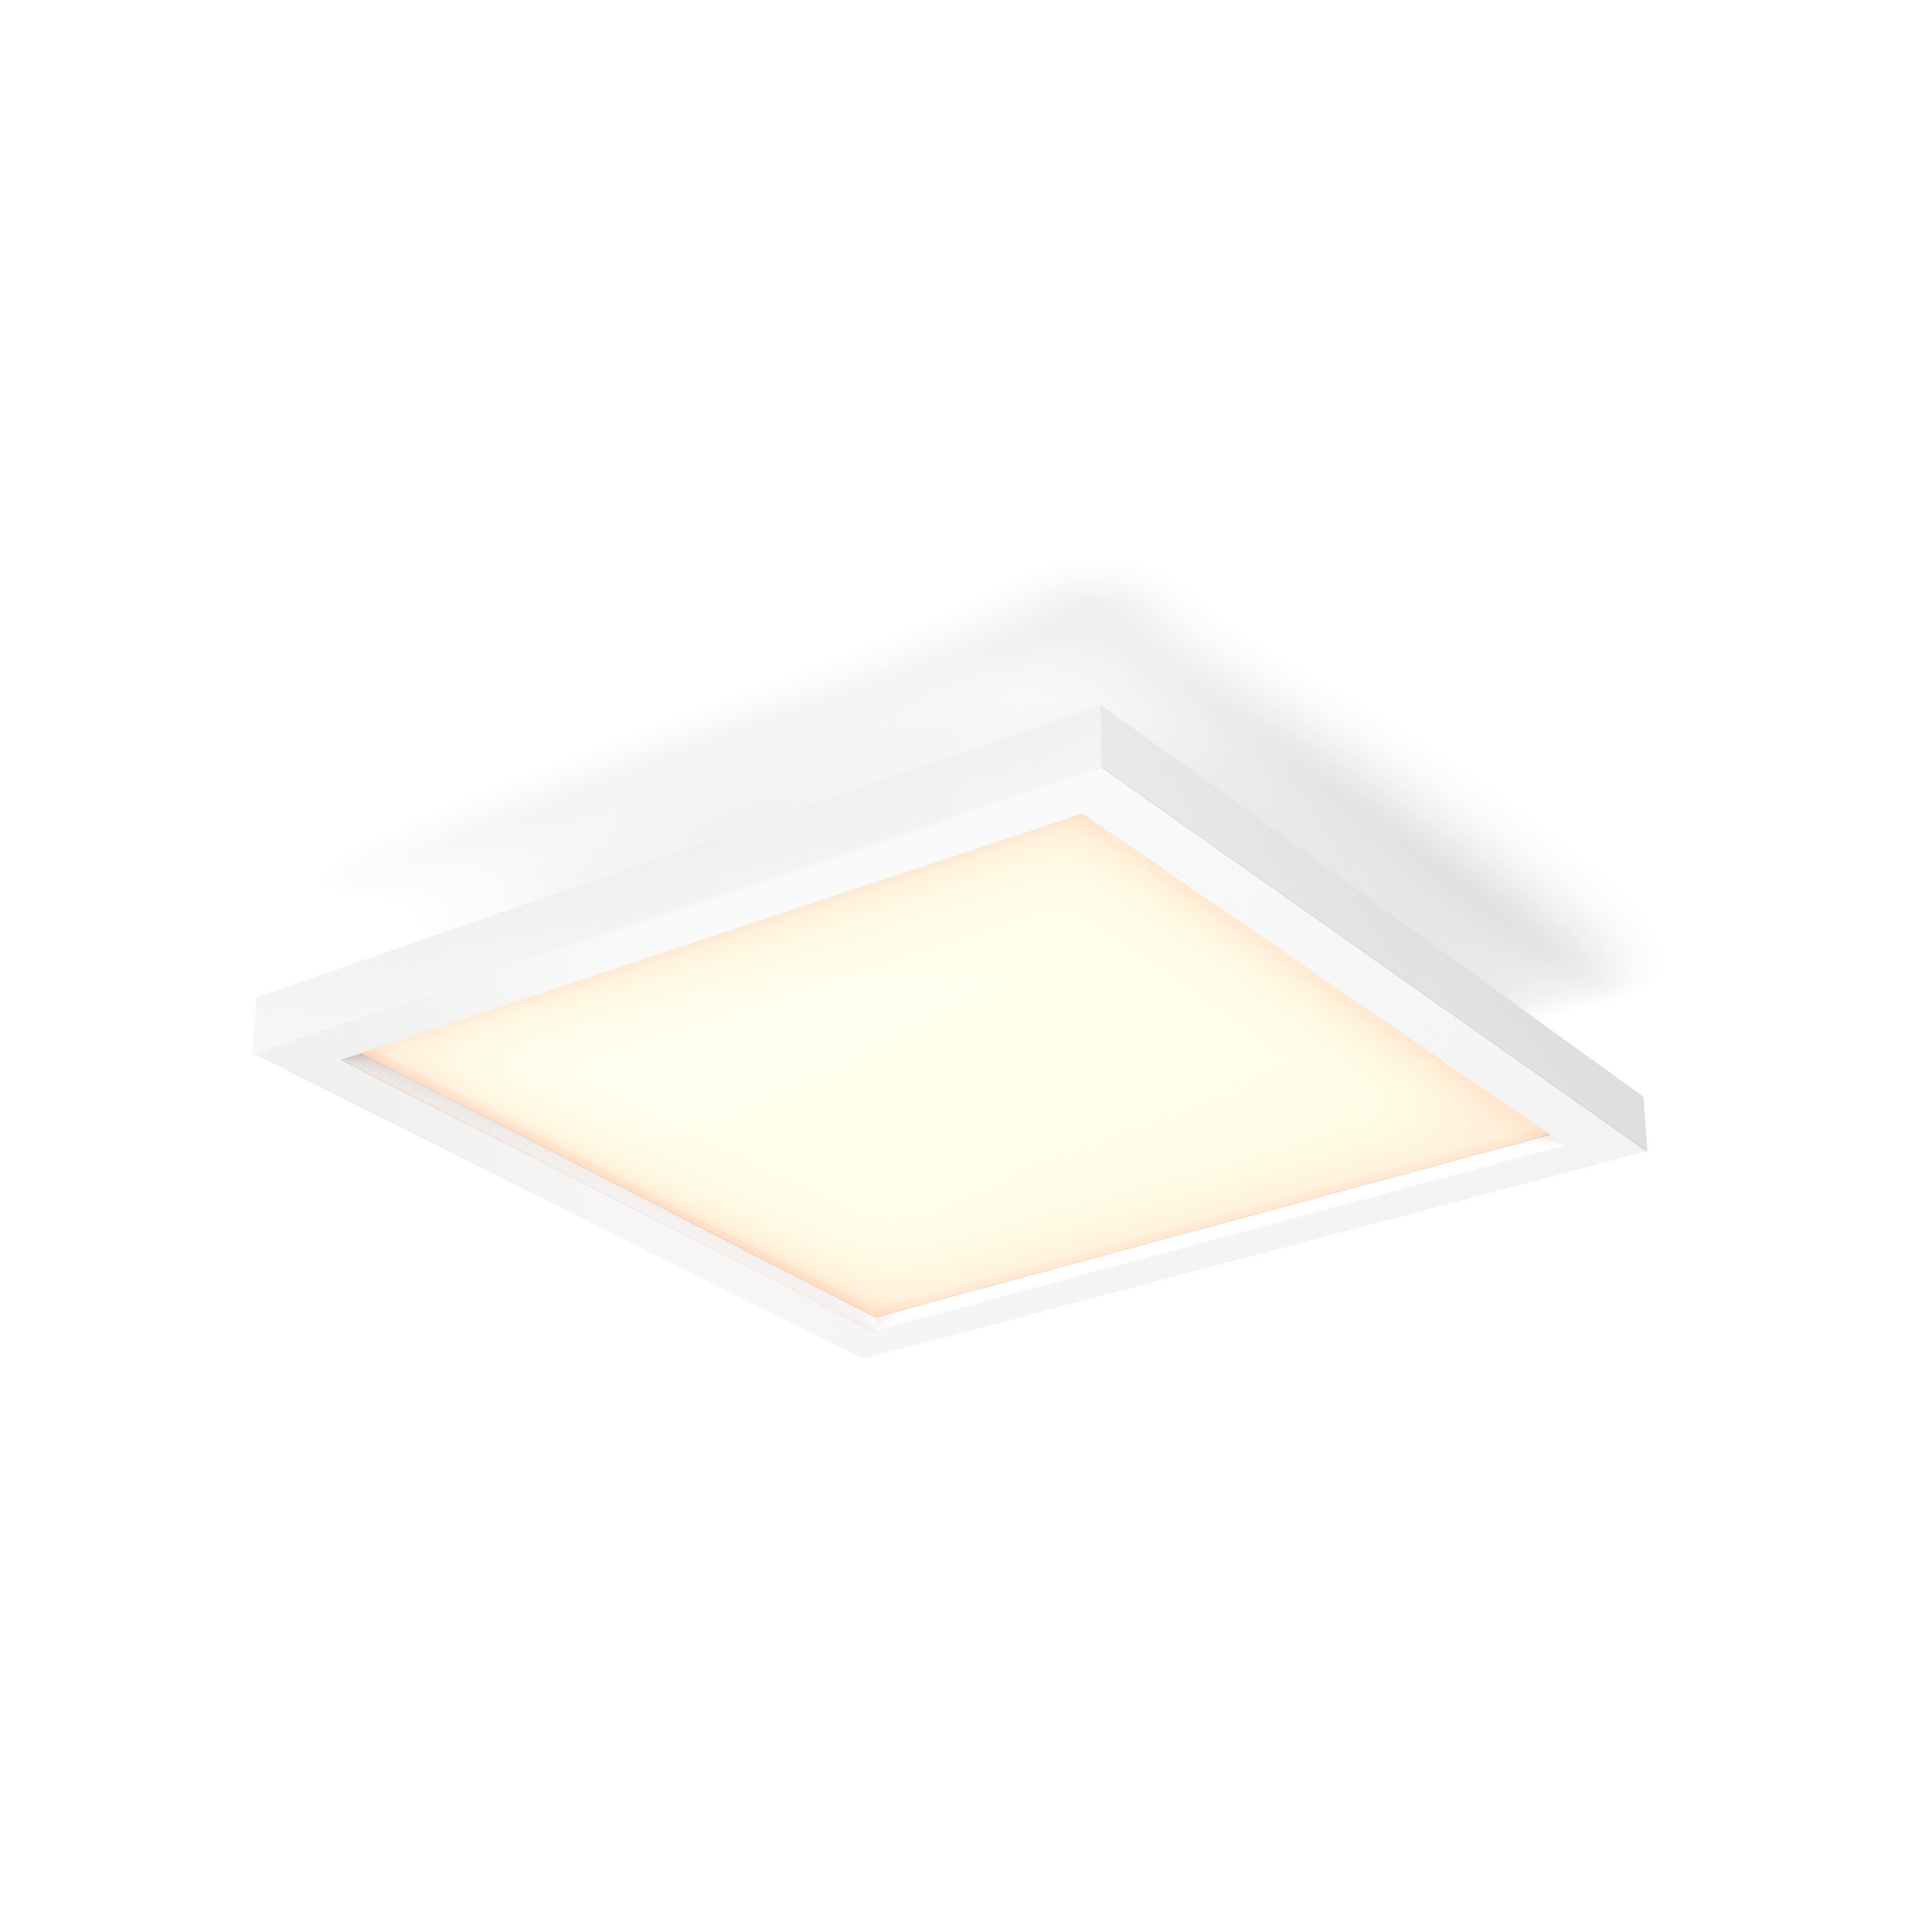 LED-Panelleuchte 'Hue White Ambiance Aurelle' eckig, weiß 2200 lm + product picture